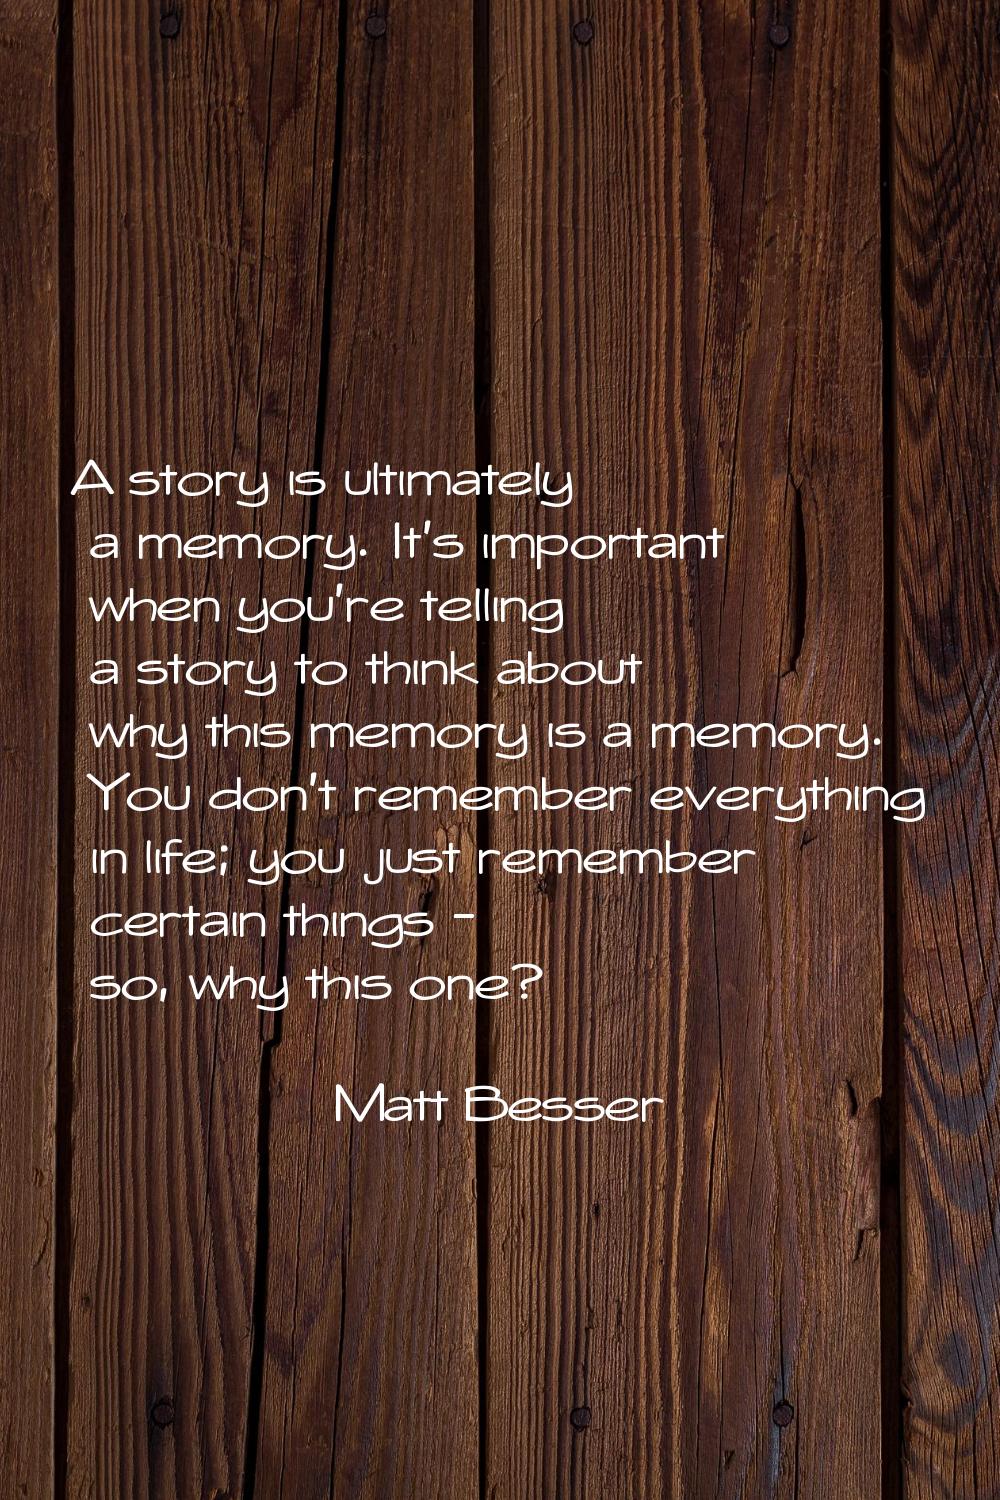 A story is ultimately a memory. It's important when you're telling a story to think about why this 